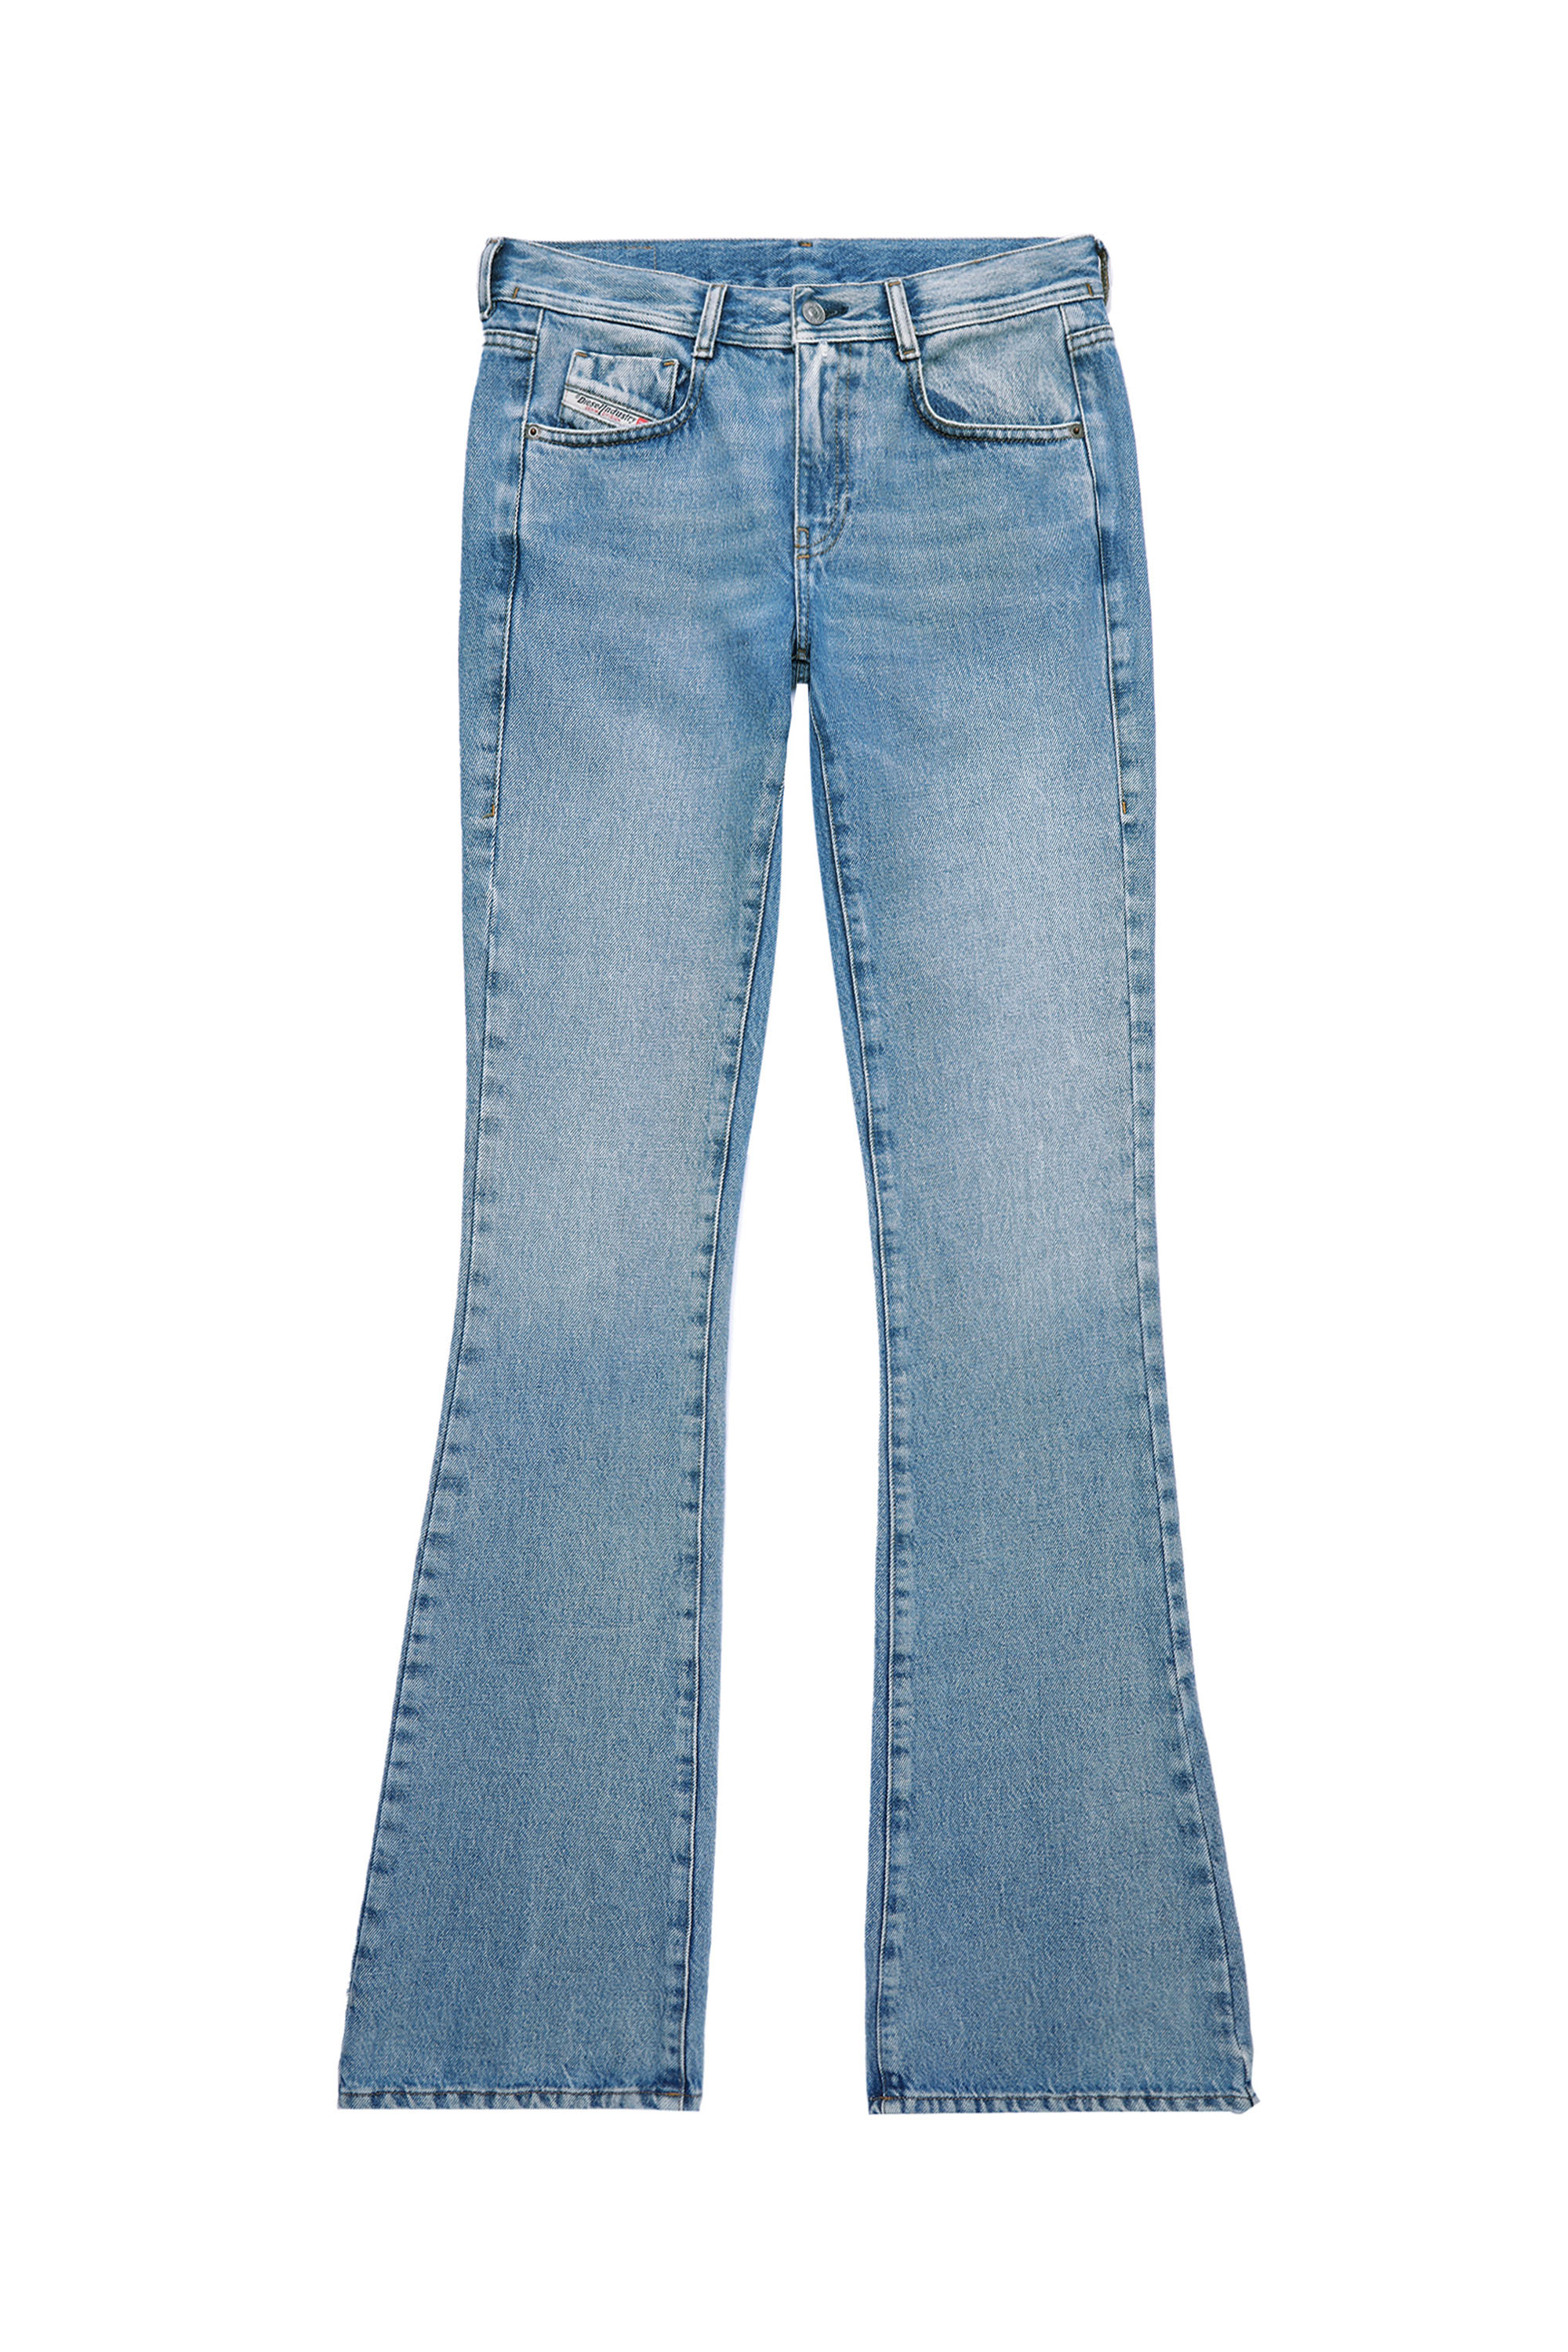 1969 D-EBBEY 09C16 Bootcut and Flare Jeans, Azul medio - Vaqueros